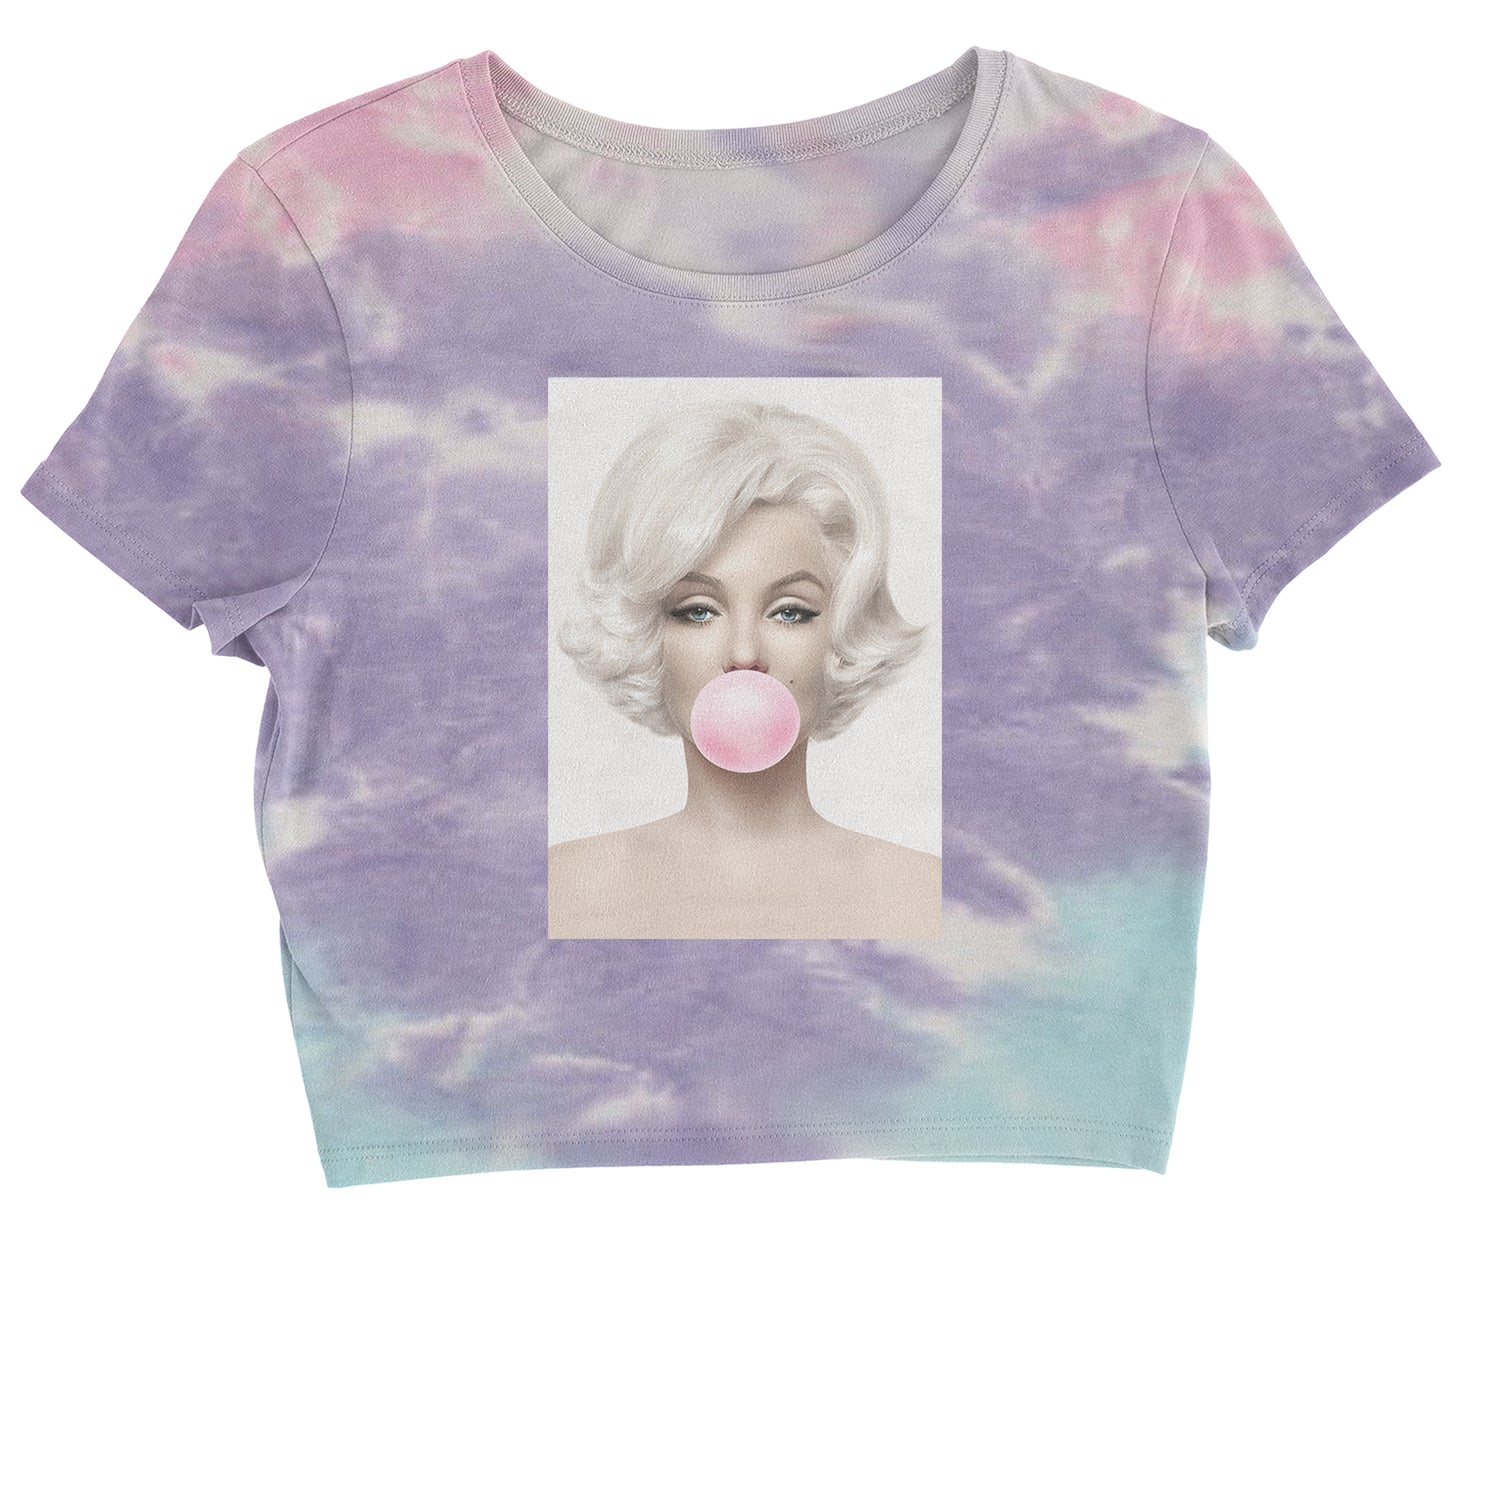 Marilyn Monroe Pink Bubble Gum Cropped T-Shirt marilyn, monroe by Expression Tees